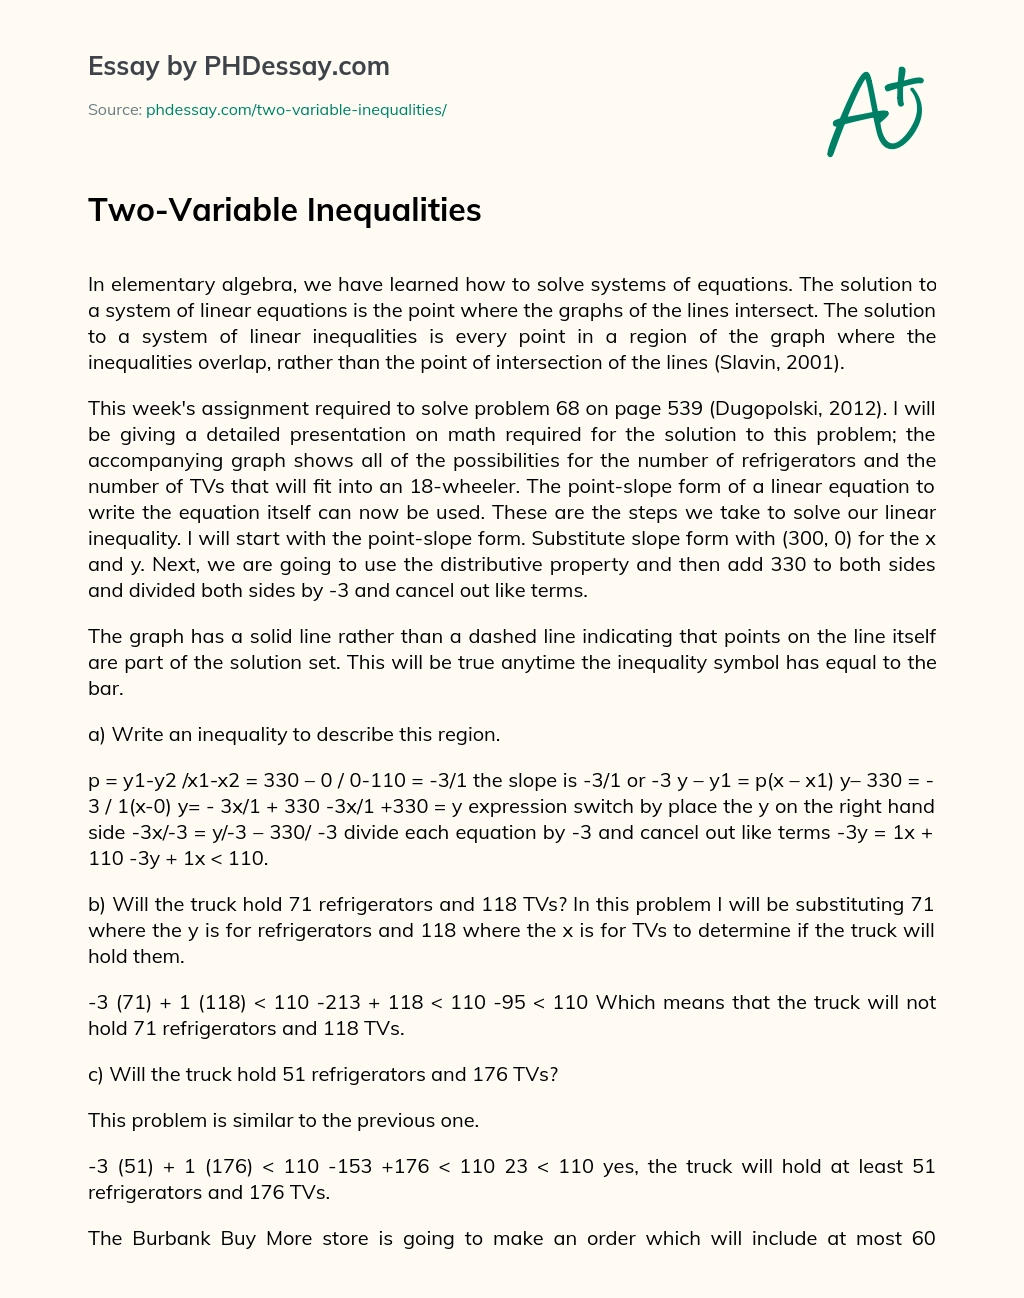 Two-Variable Inequalities essay